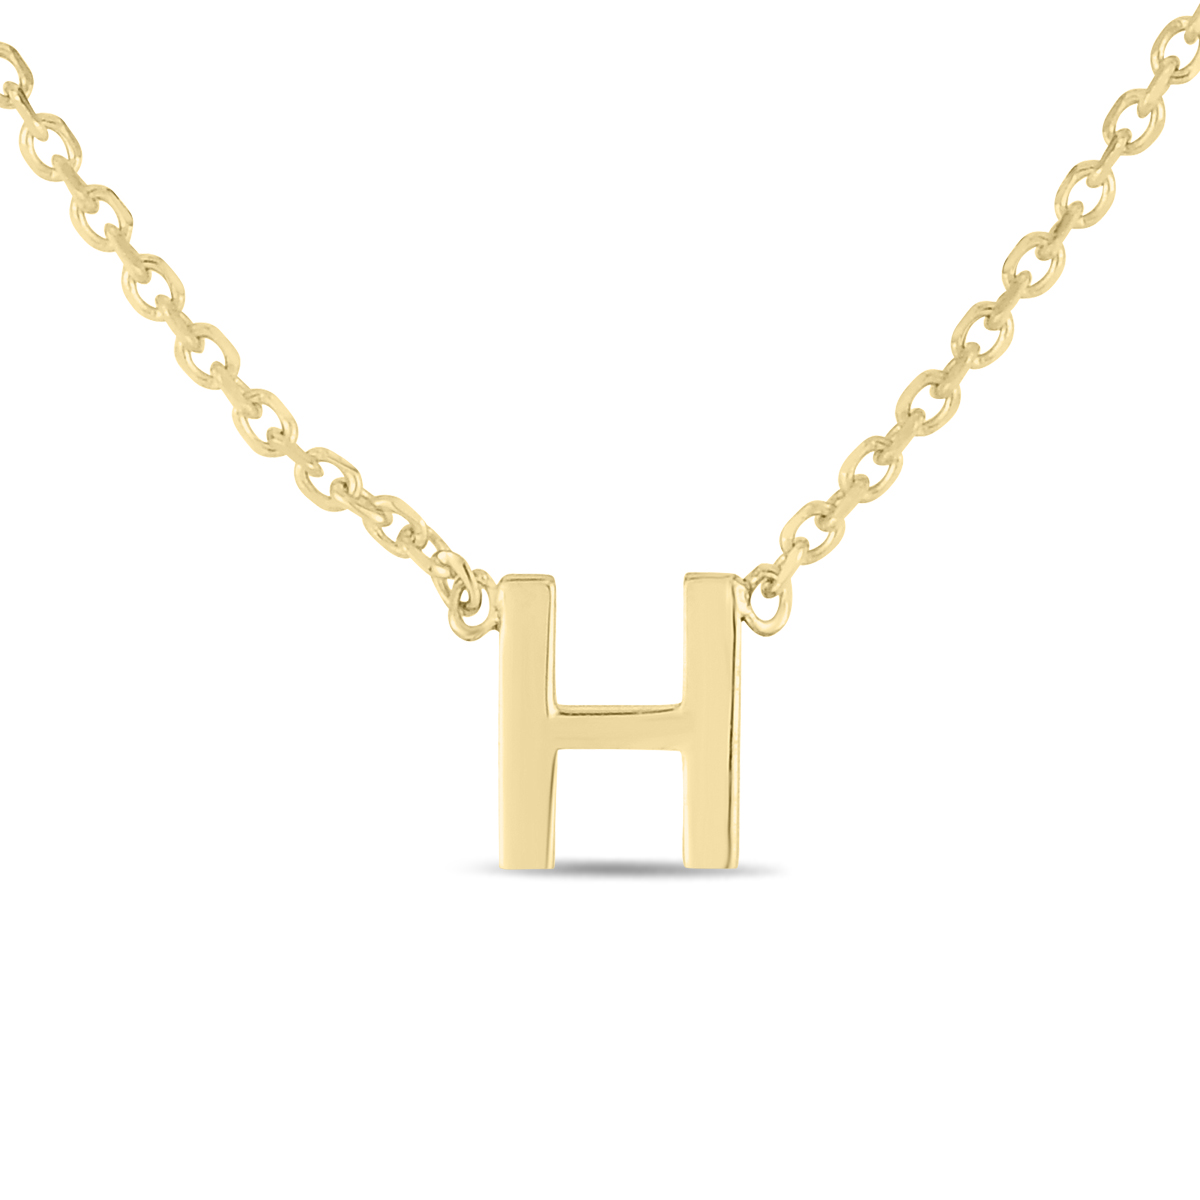 Image of 14K Solid Yellow Gold H Mini Initial Necklace